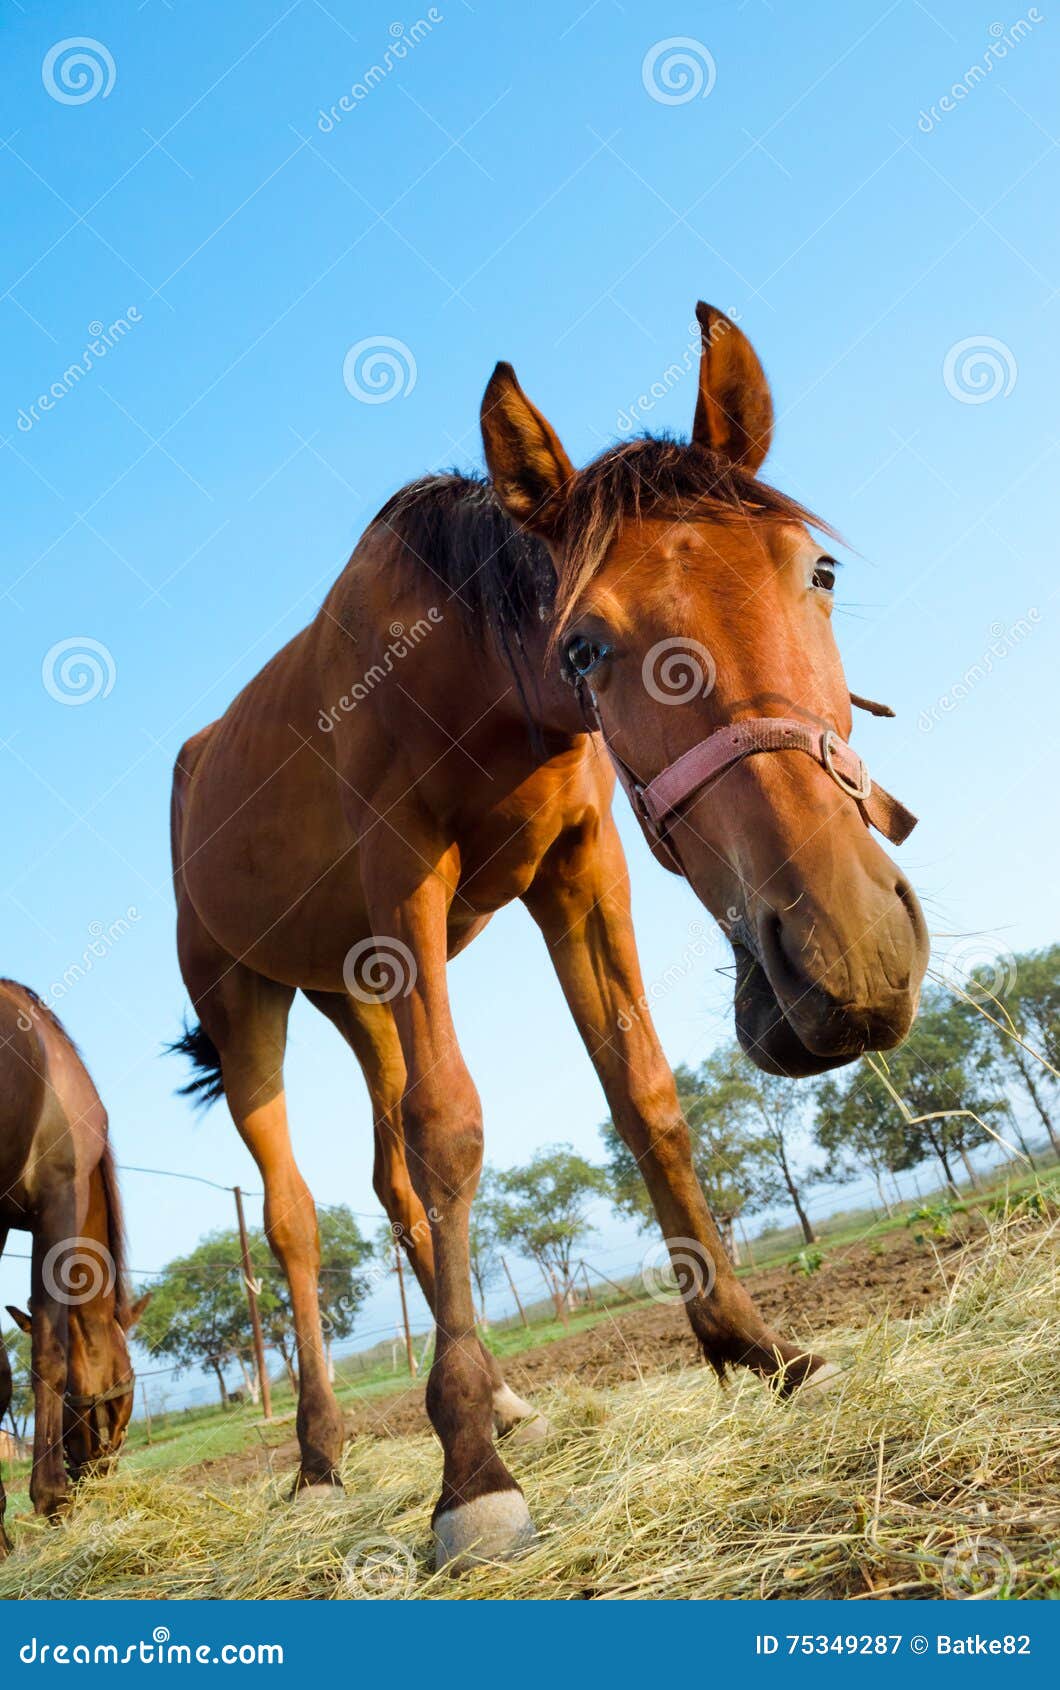 Curious Brown Horse Low Angle Stock Image Image Of Outdoor